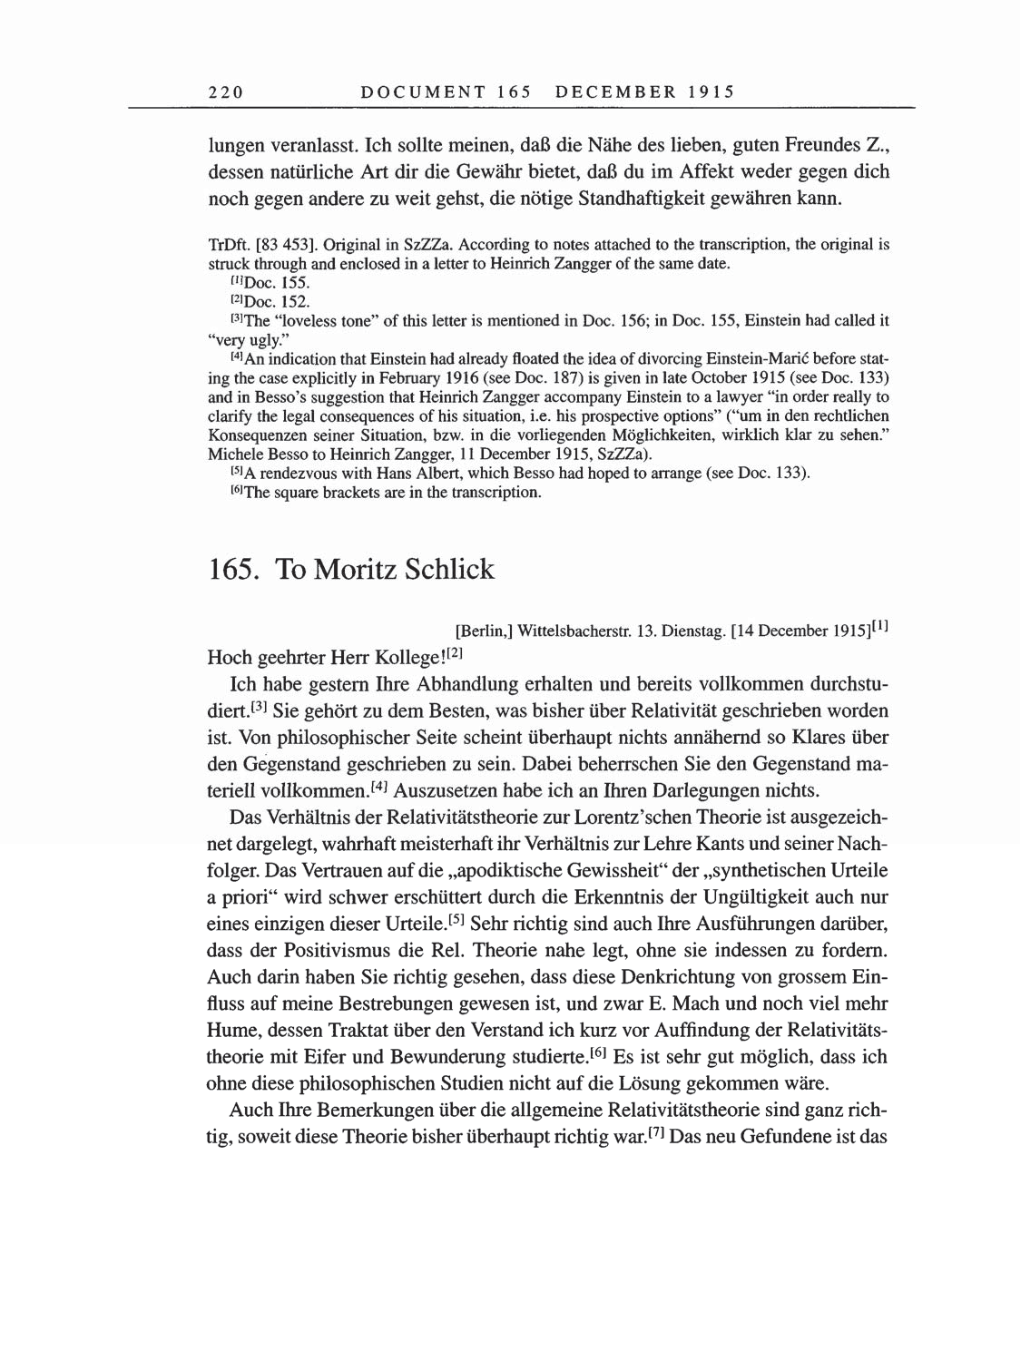 Volume 8, Part A: The Berlin Years: Correspondence 1914-1917 page 220